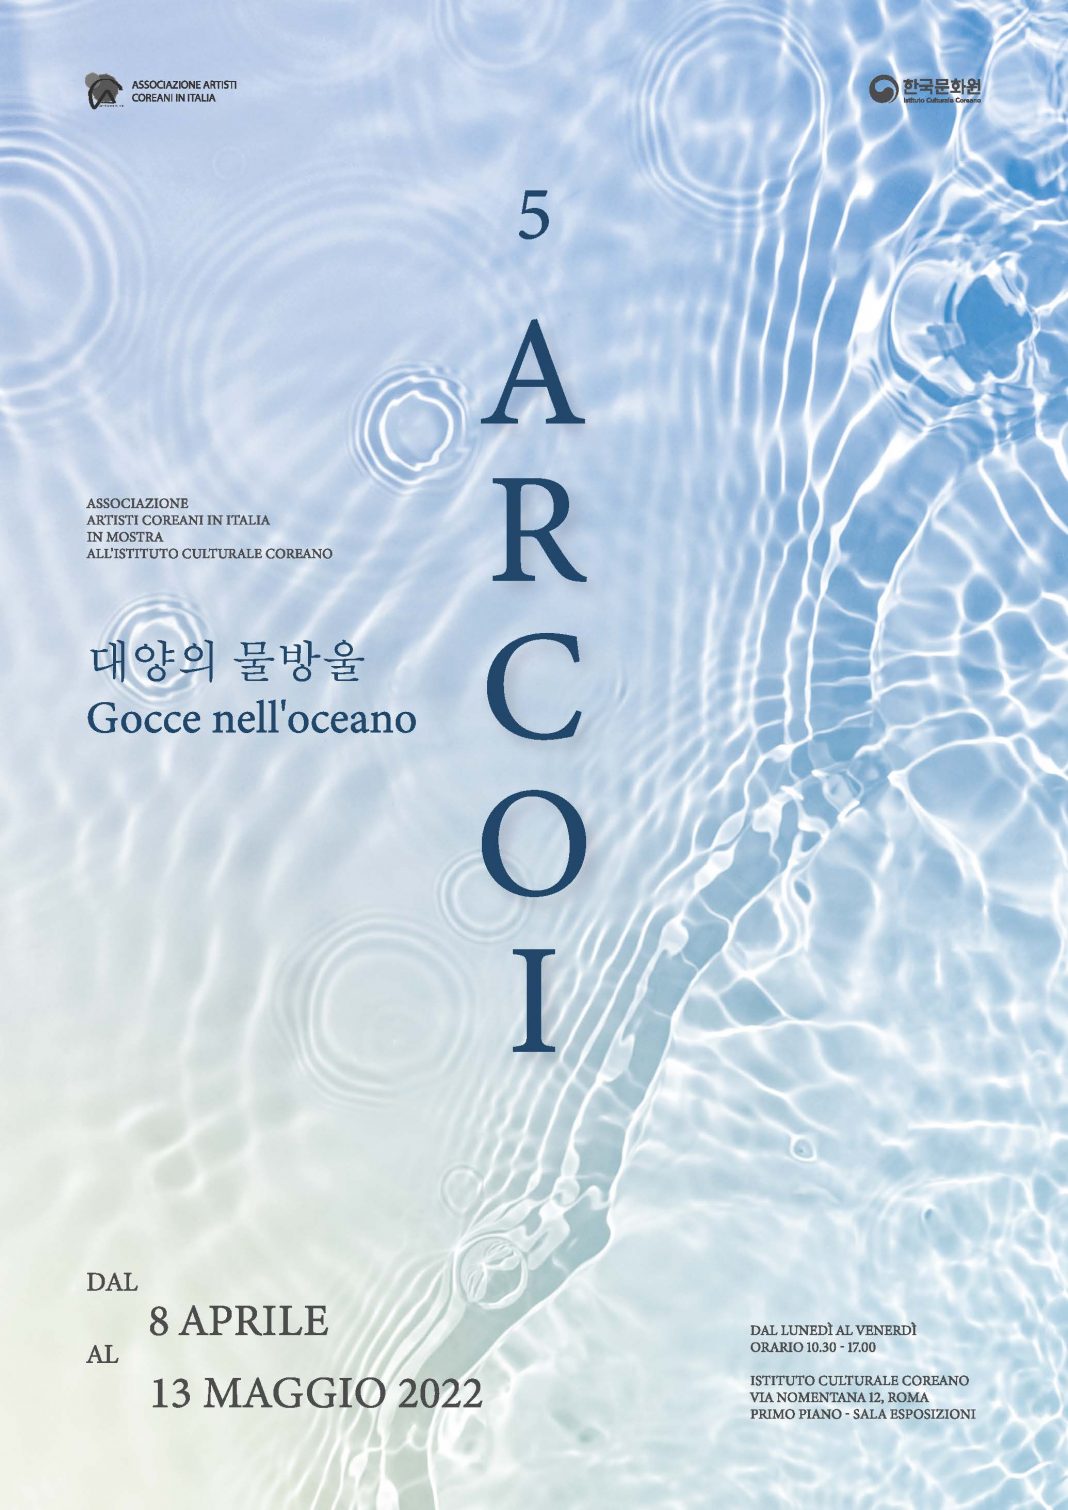 ARCOI – Gocce nell’oceanohttps://www.exibart.com/repository/media/formidable/11/img/25d/icc2022_arcoi_poster_20220311_stampa_2-1-1068x1510.jpg